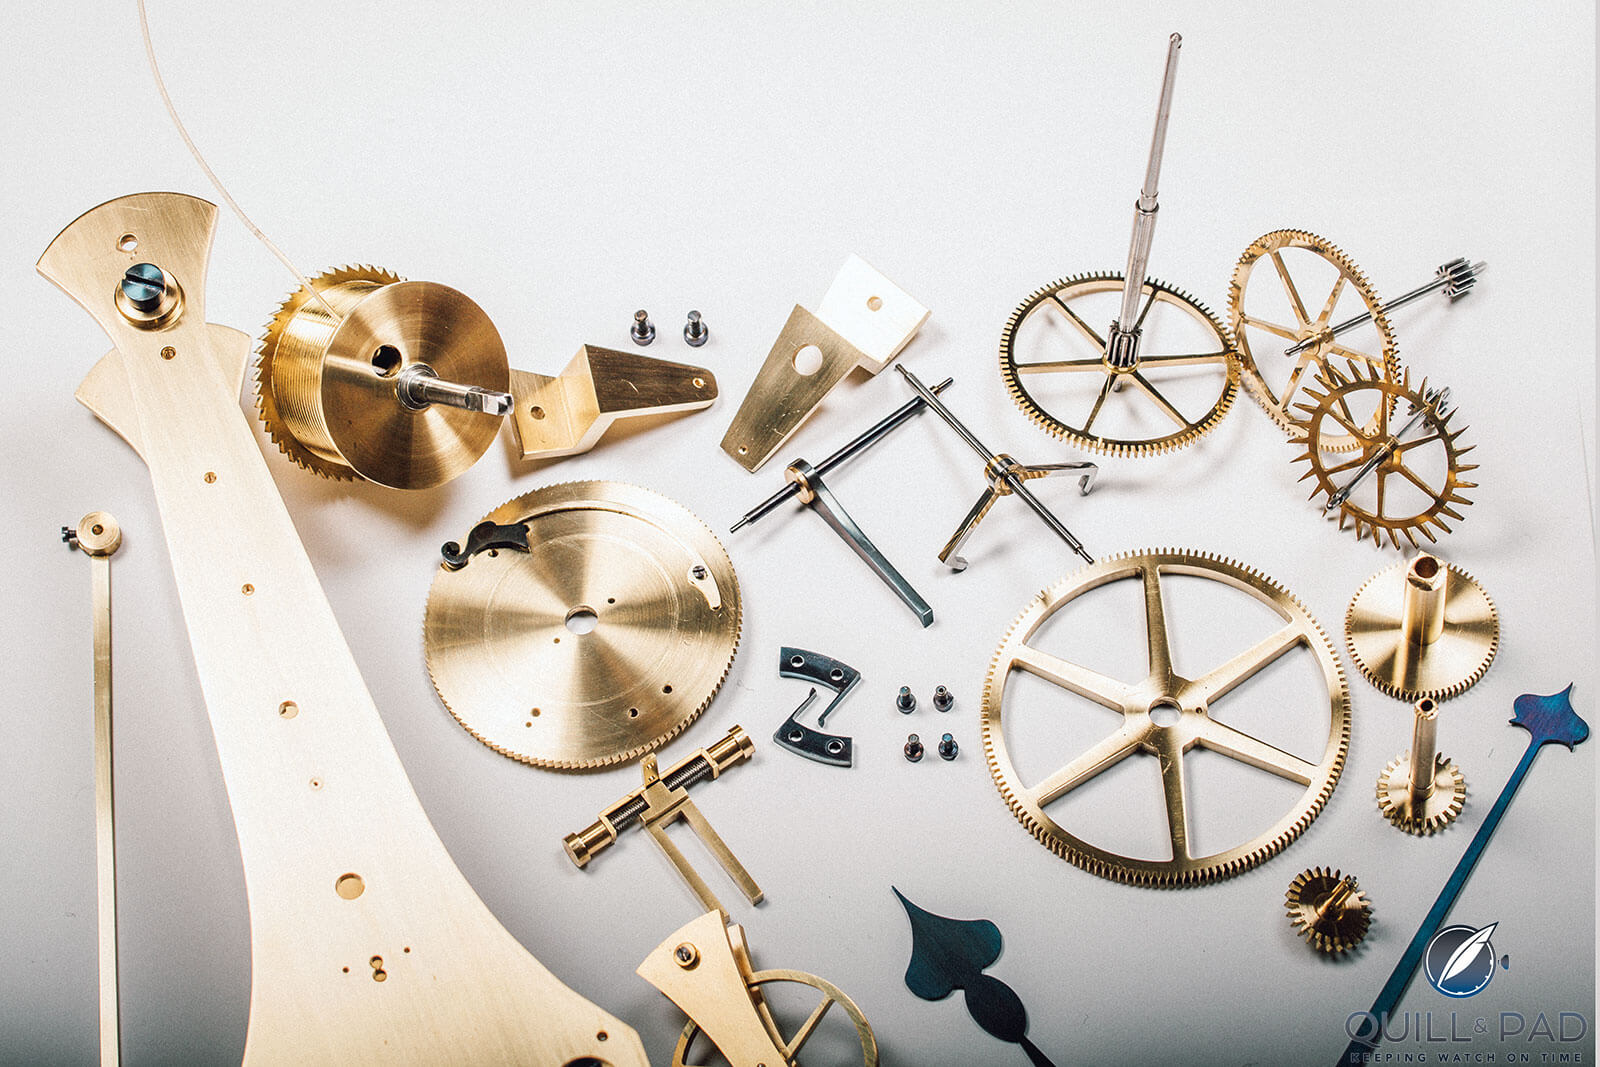 Just a few of the components in Tyler John Davies's Equilibrium clock